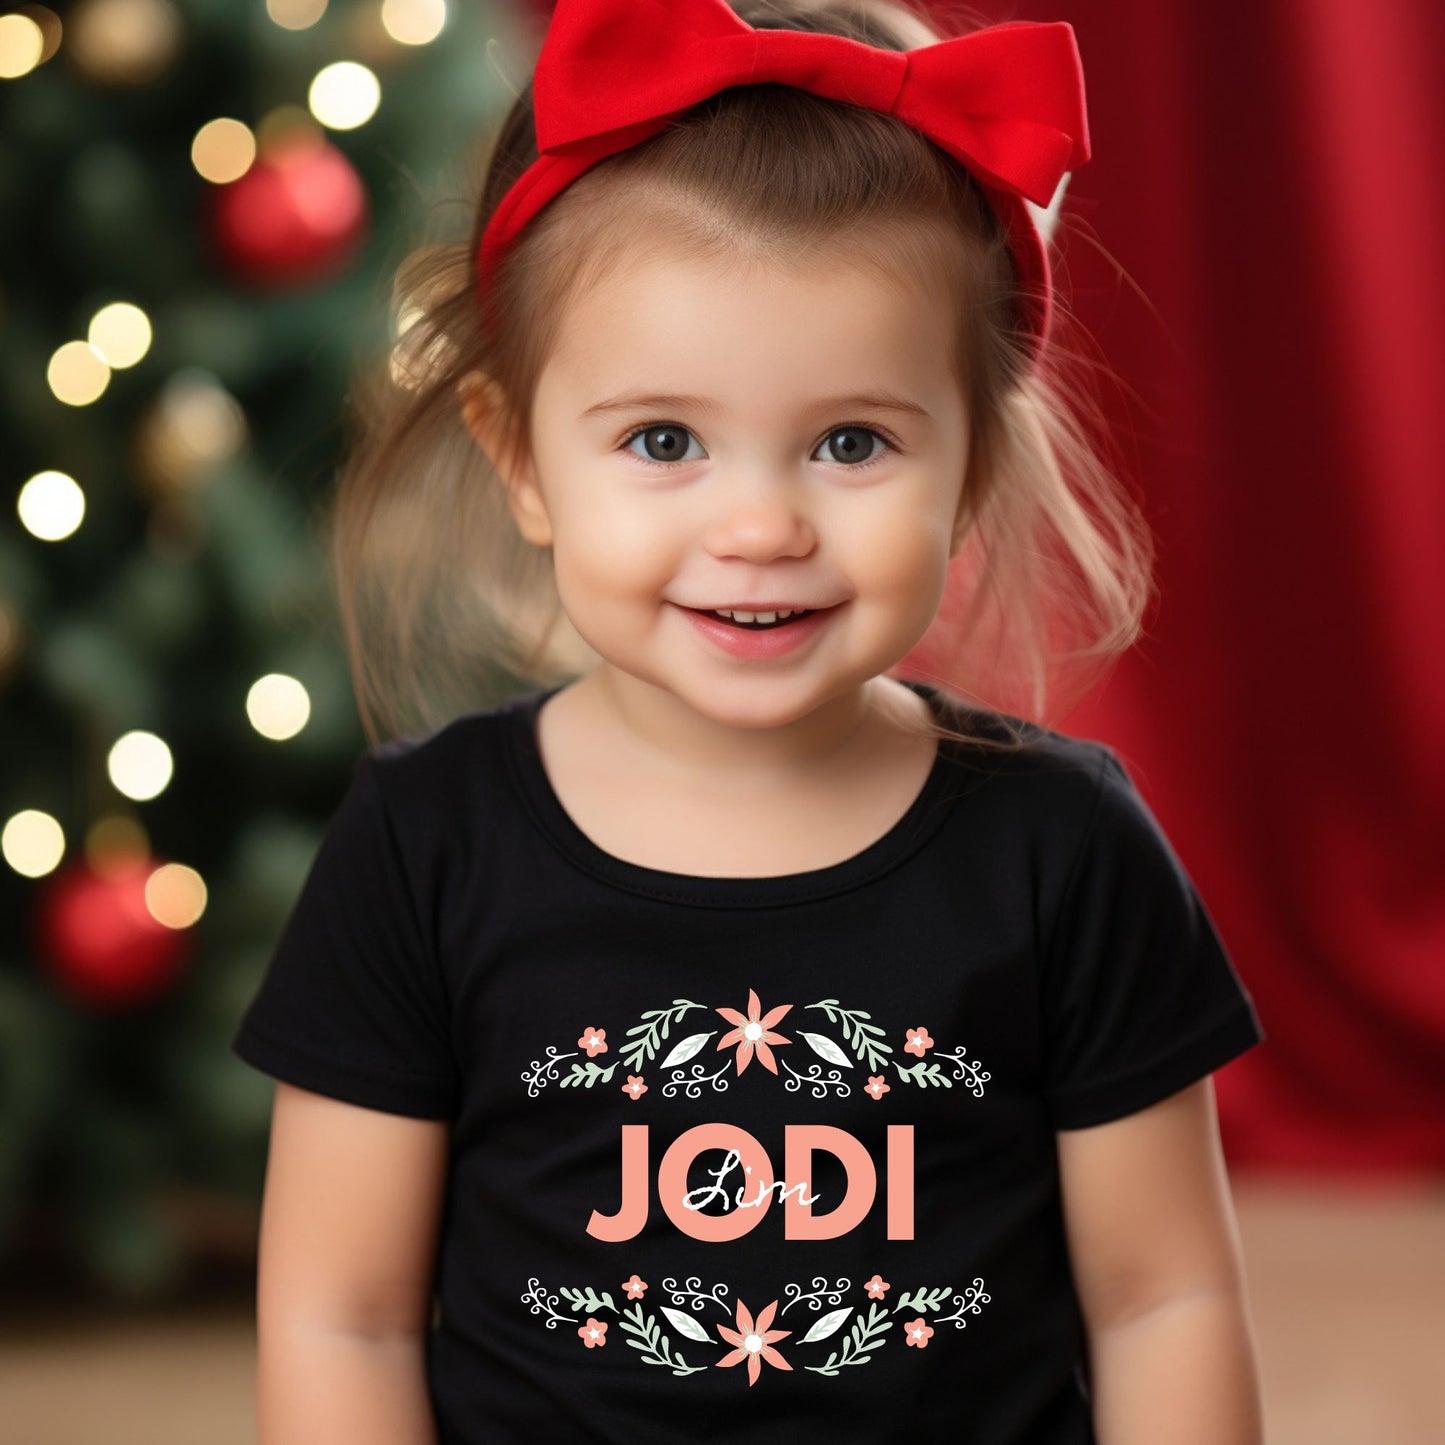 Personalized "Blossom Joy" Baby Romper / Baby Tees